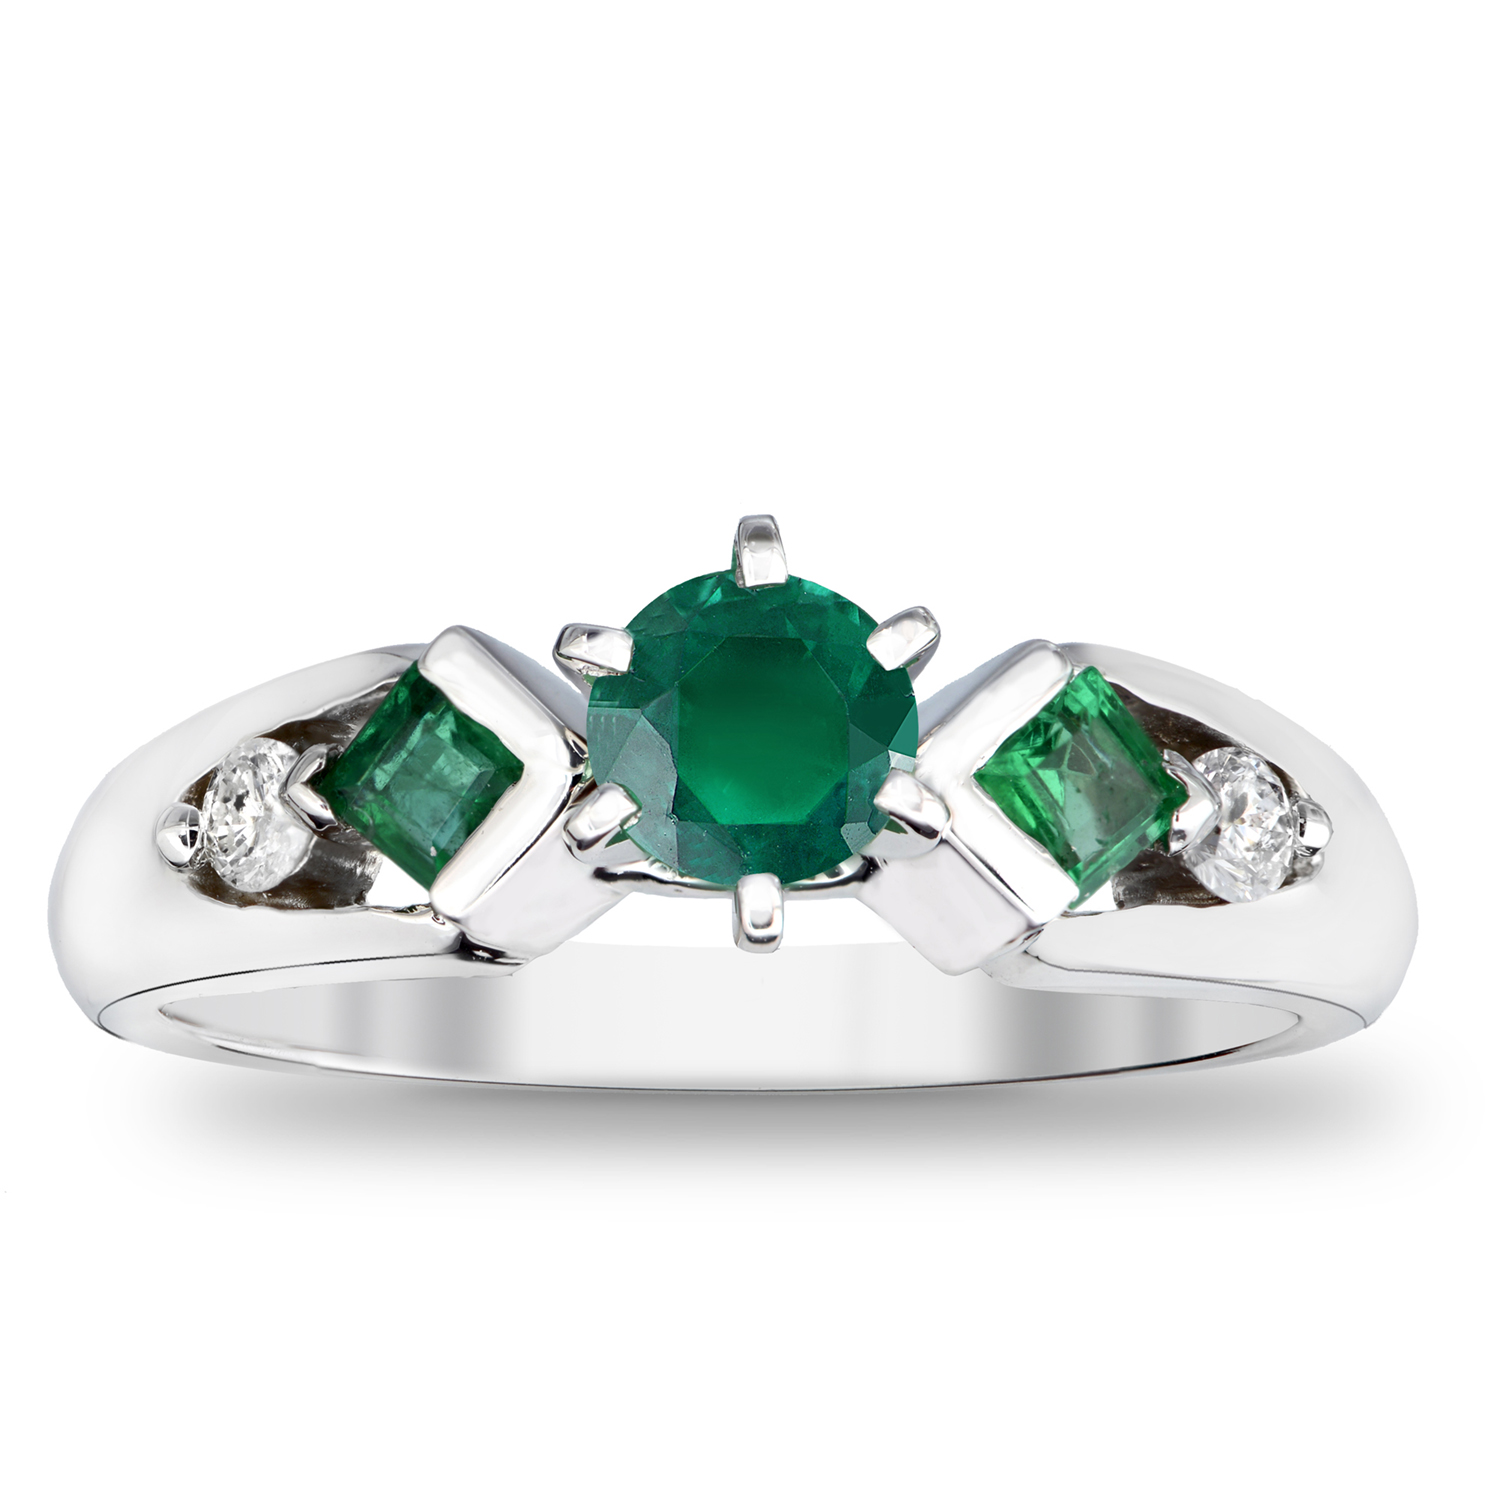 View 0.80cttw Emerald and Diamond Engagement Ring in 14k Gold